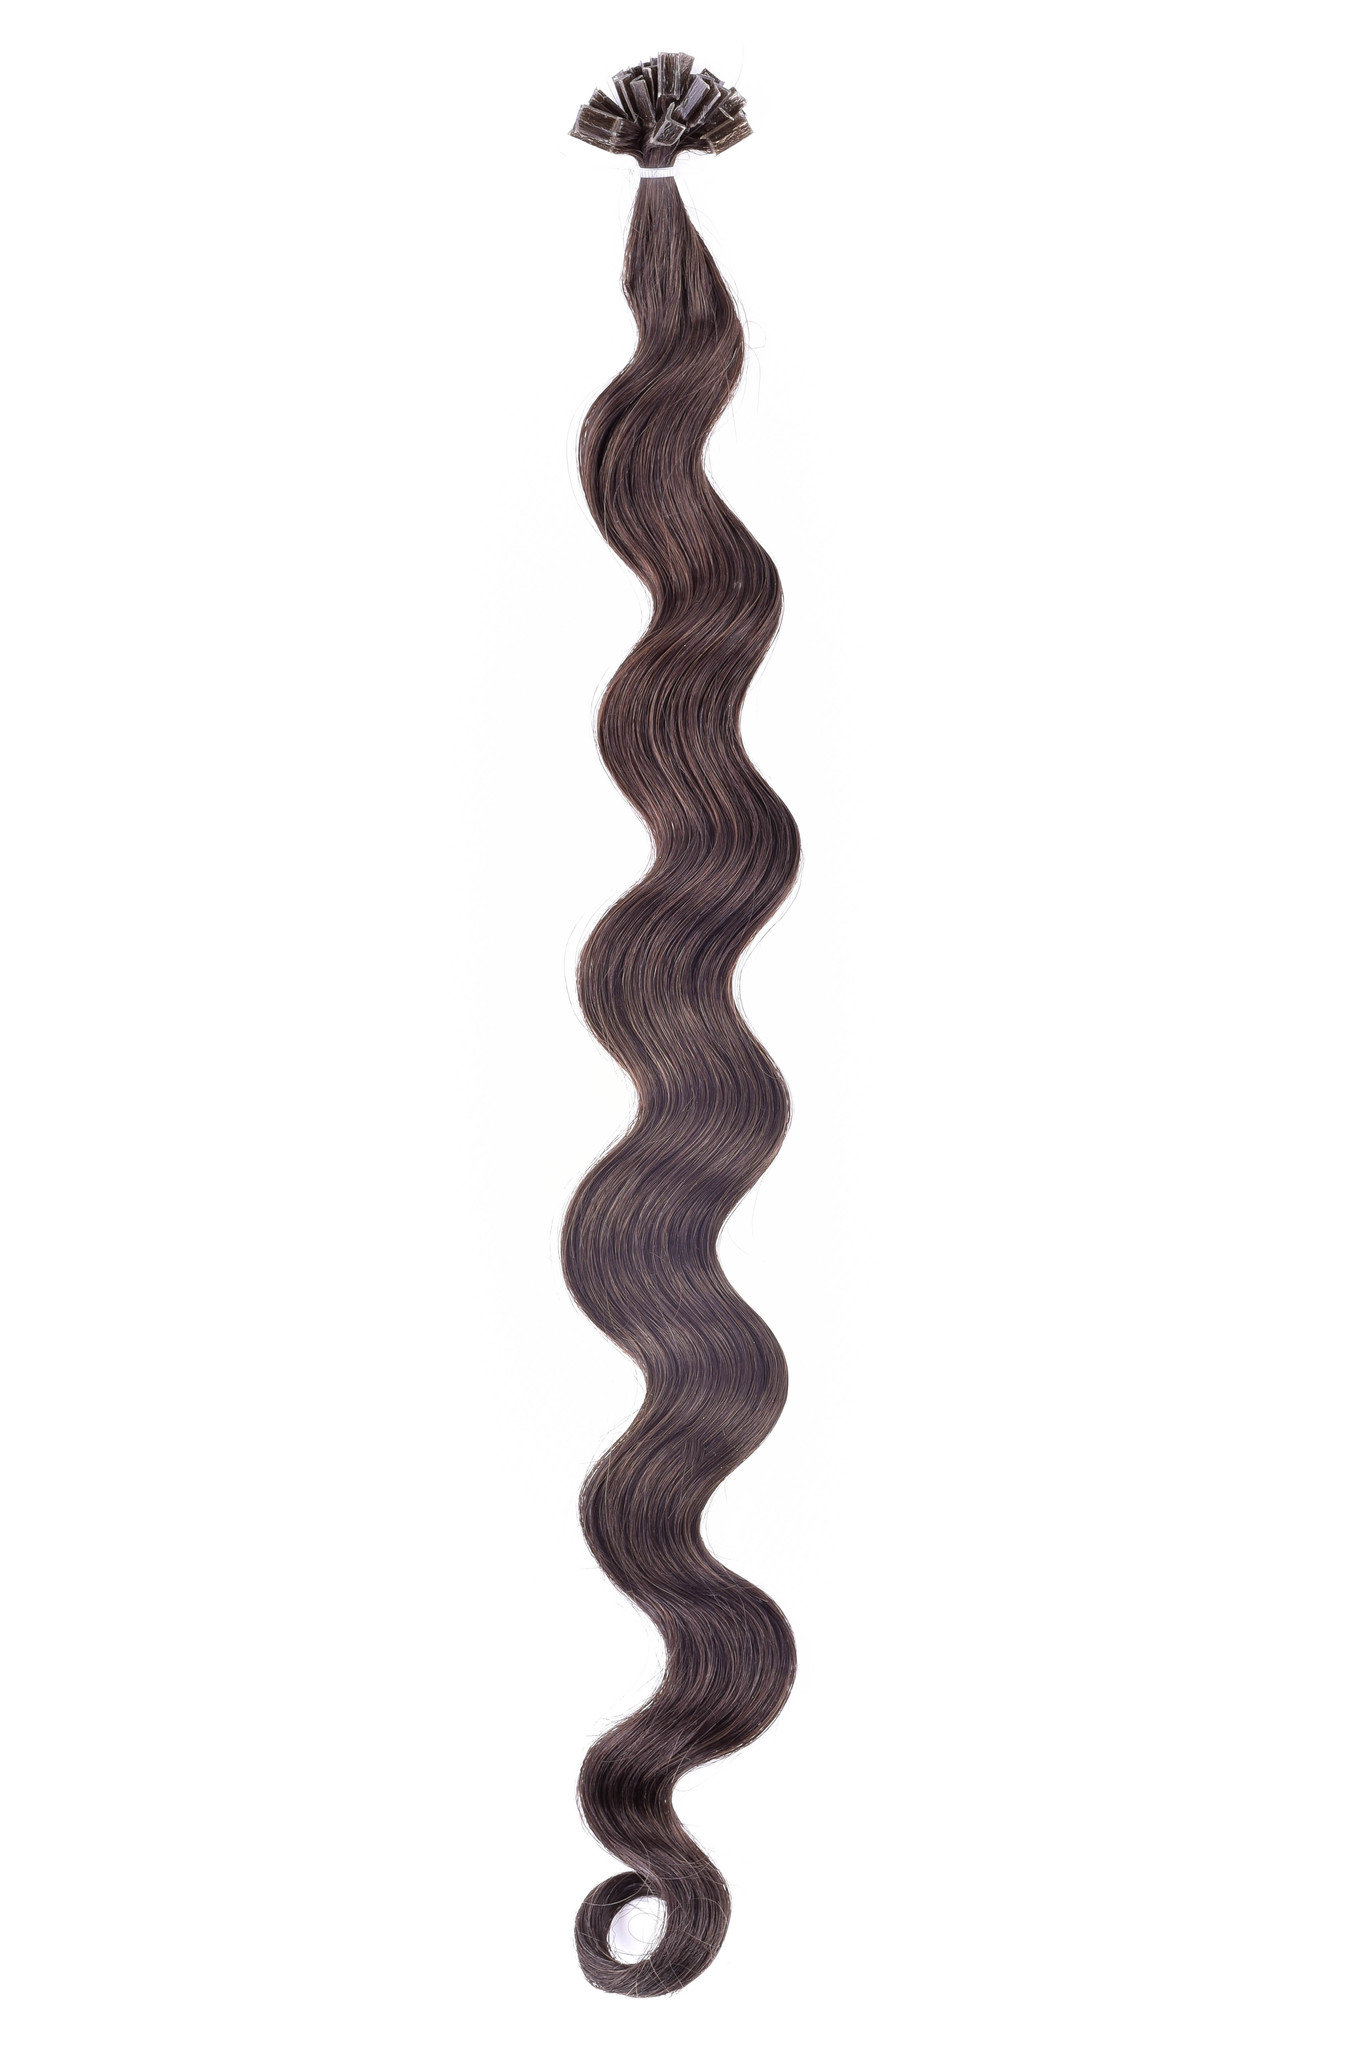 SilverFox Wax Extensions Loose Wave 55cm #4 Chocolate Brown